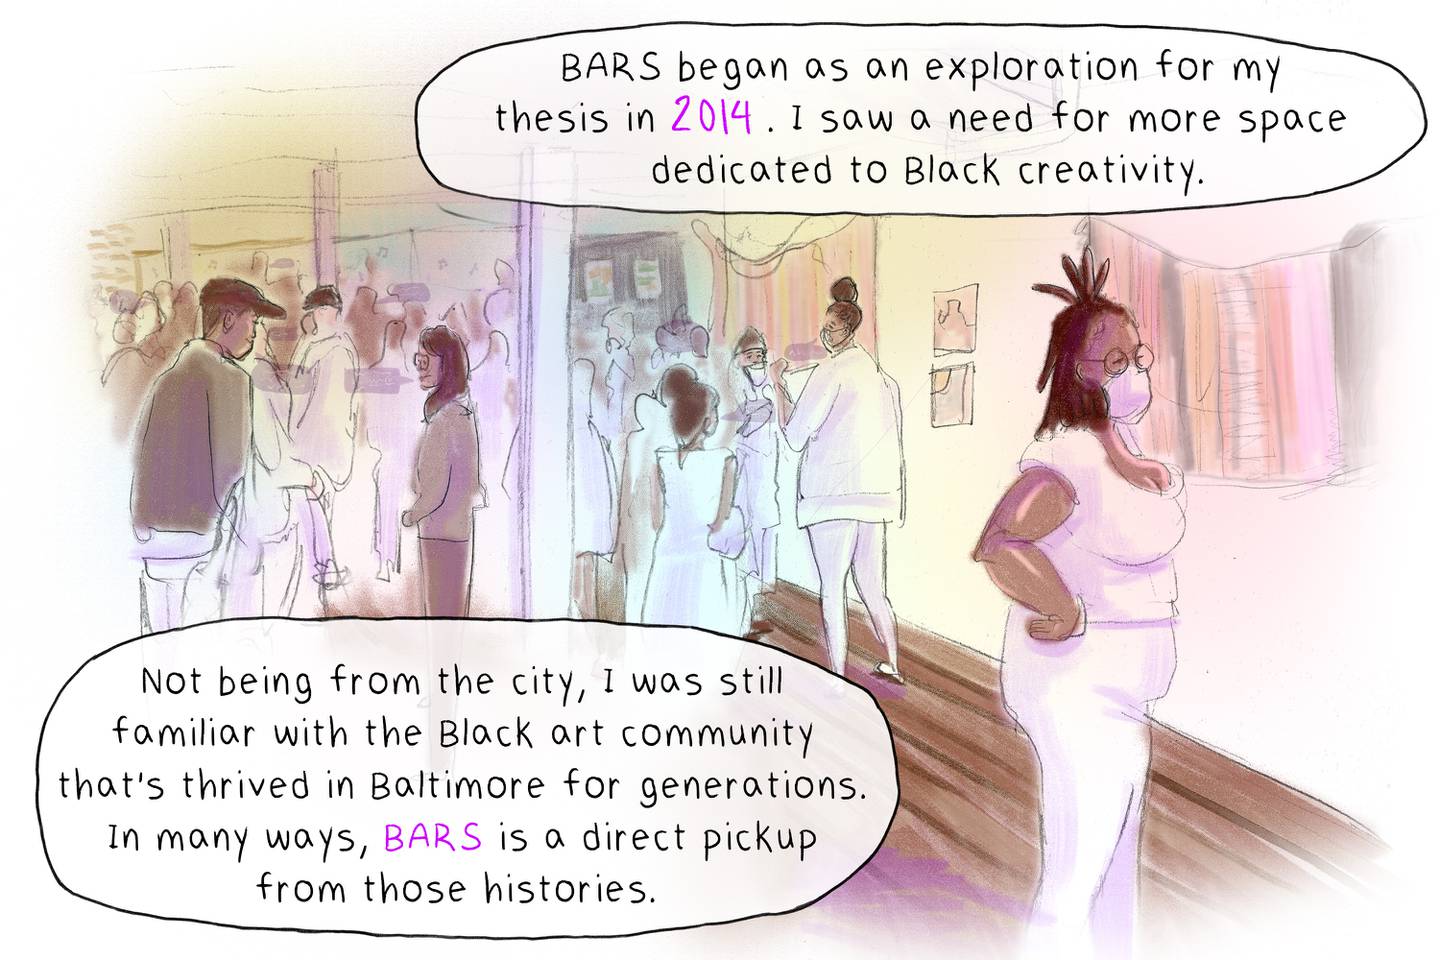 Rhea: “BARS began as an exploration of my thesis in 2014. I saw a need for more space dedicated to Black creativity. Not being from the city, I was still familiar with the Black art community that’s thrived in Baltimore for generations. In many ways, BARS is a direct pickup from those histories.”